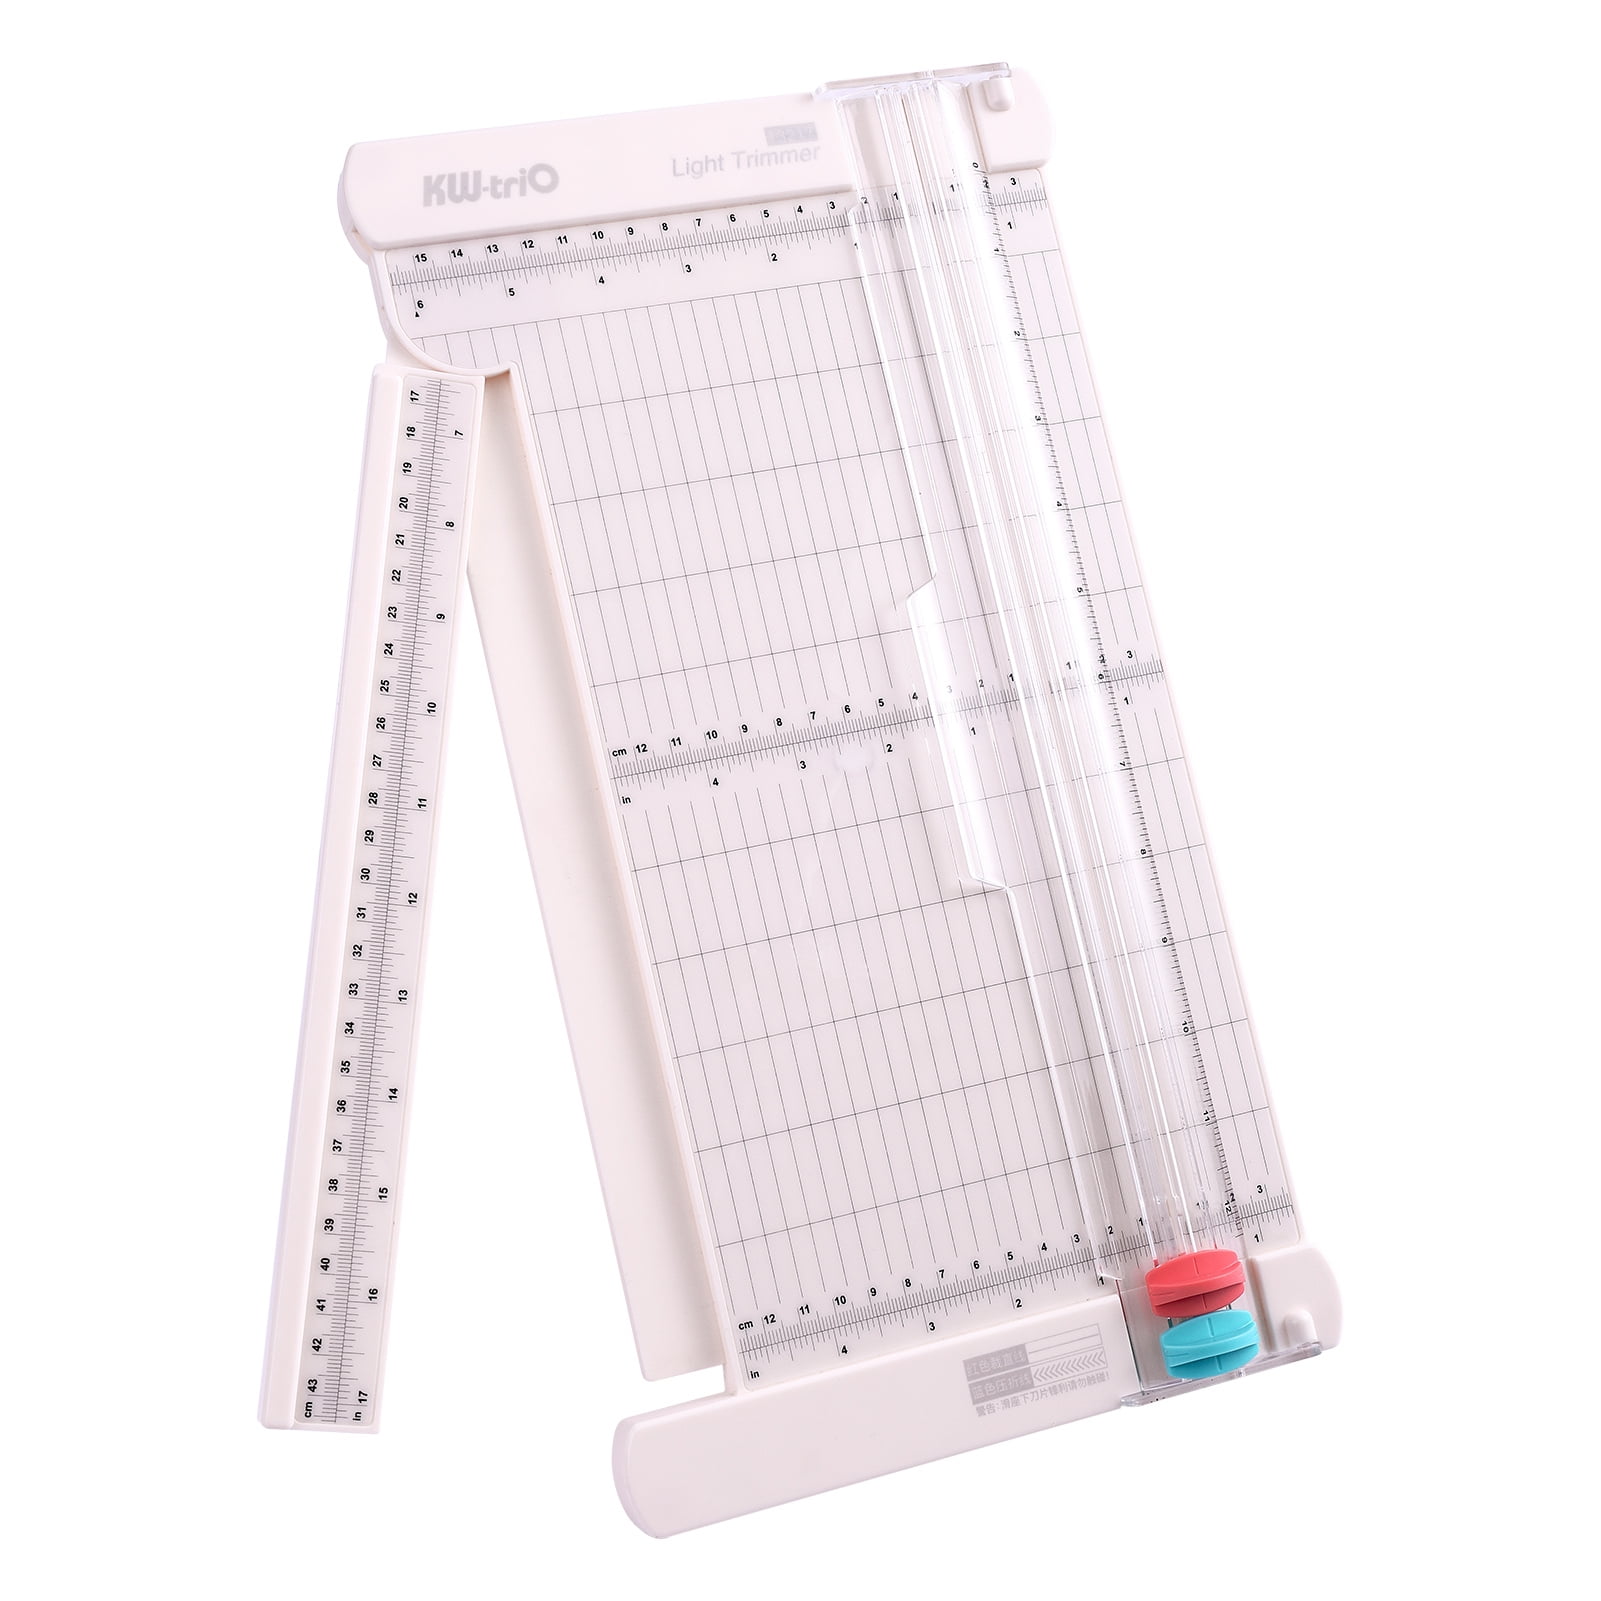 Guillotine Paper Trimmer (8.5 inch)